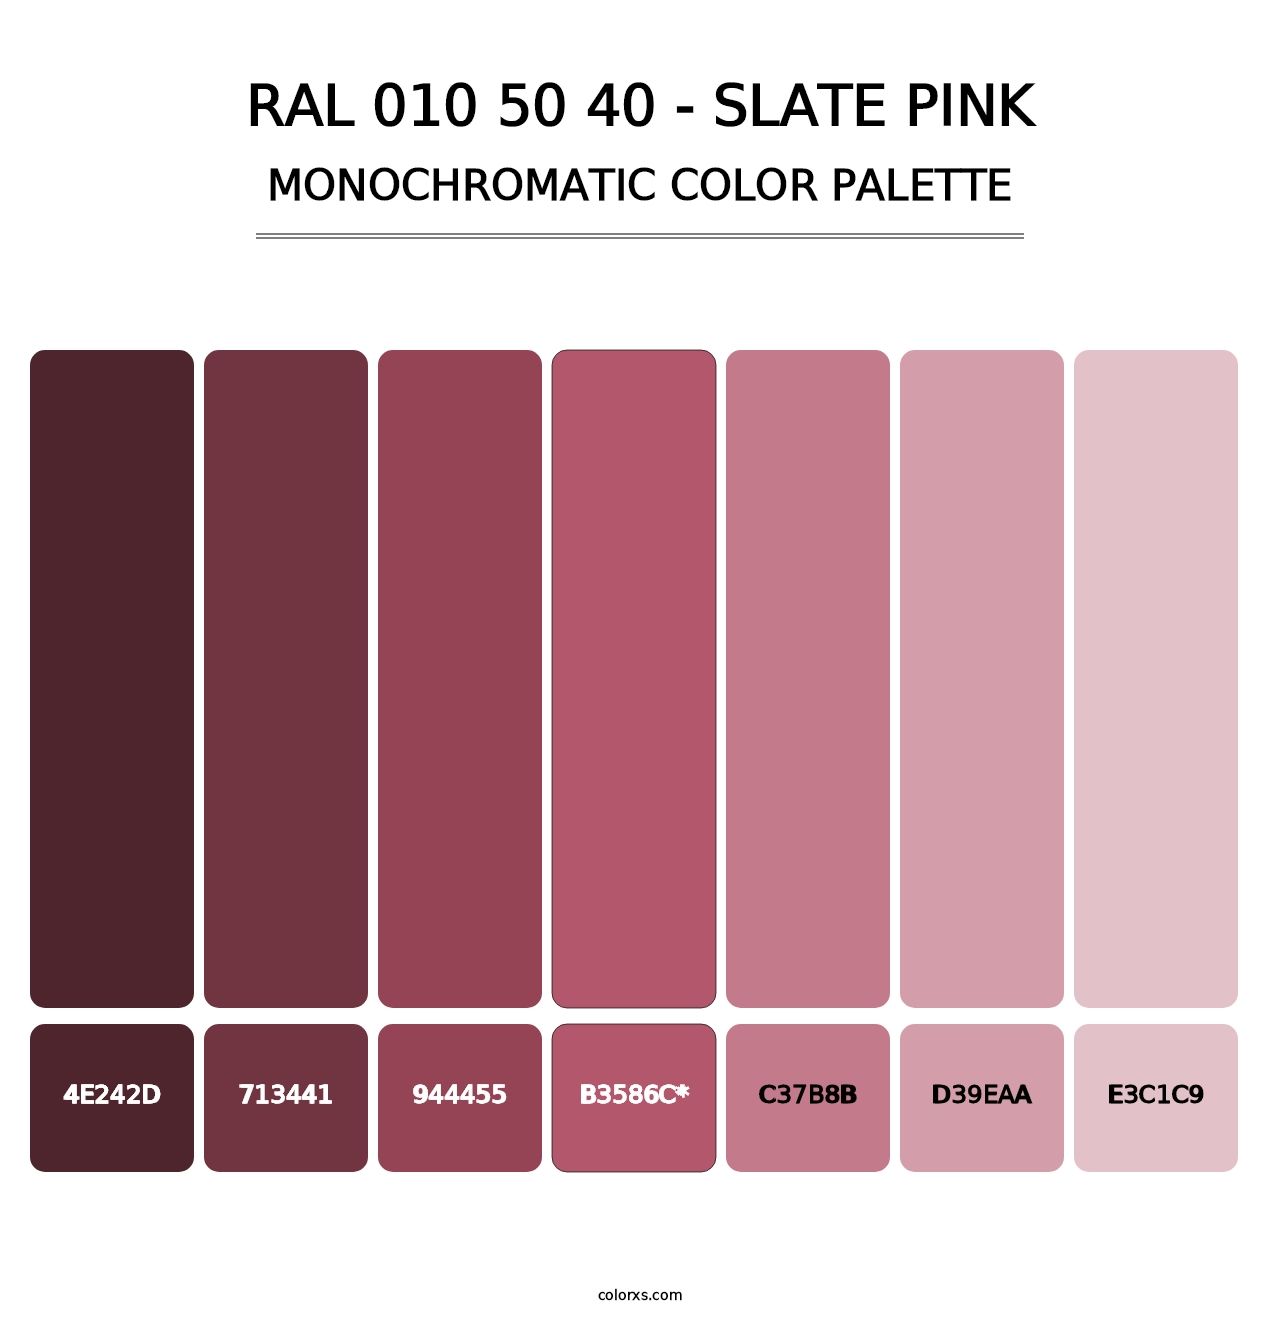 RAL 010 50 40 - Slate Pink - Monochromatic Color Palette